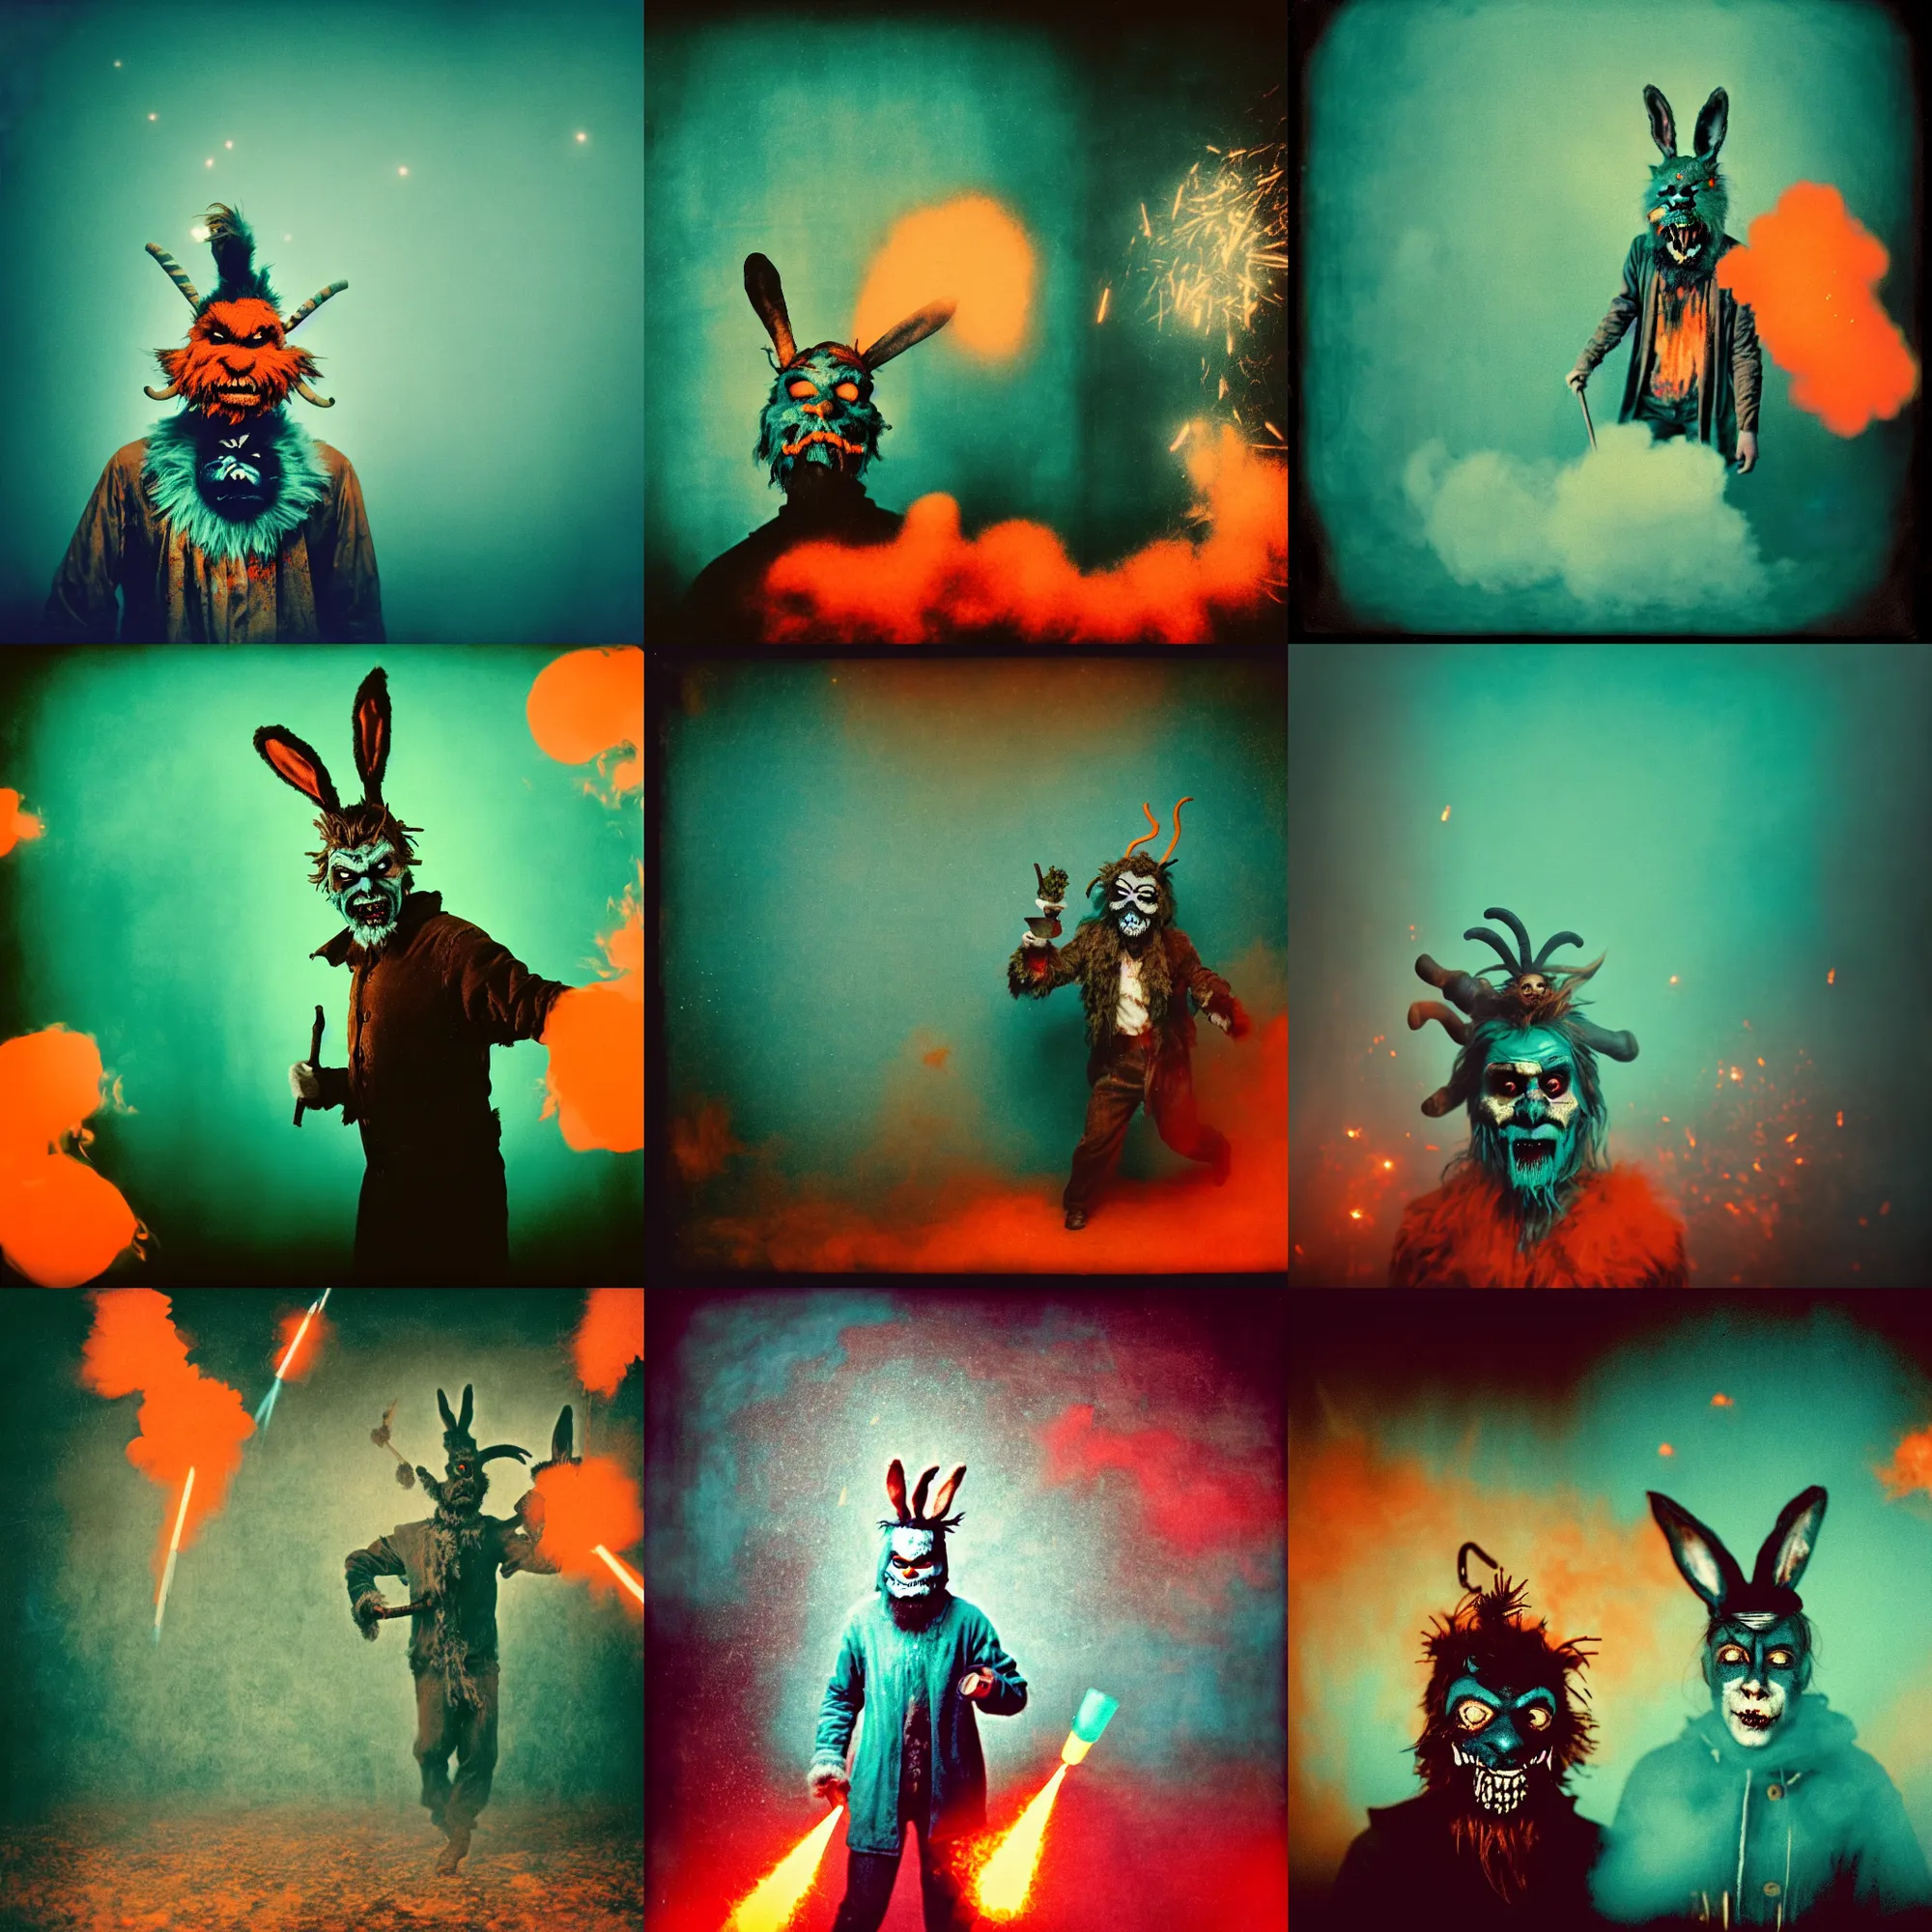 Prompt: kodak portra 4 0 0, wetplate, teal and orange colours, krampus, bunny head, the walking dead, 1 9 1 0 s style, motion blur, portrait photo of a backdrop, explosions, rockets, bombs, sparkling, fog, by georges melies and by britt marling